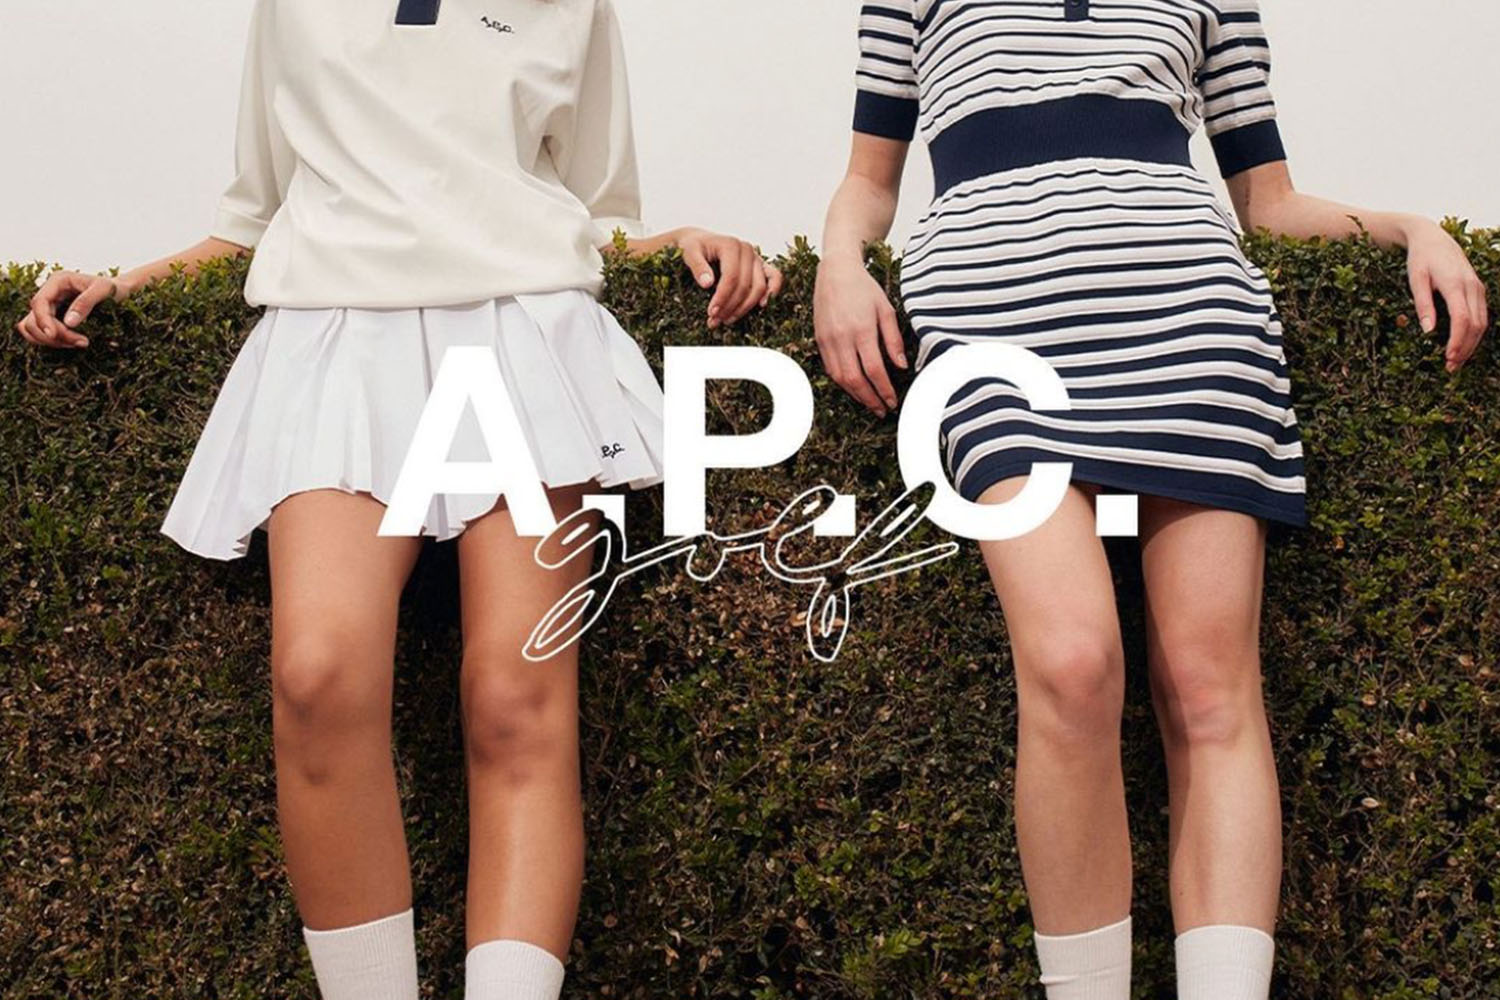 two girls in tennis girl with the APC golf logo